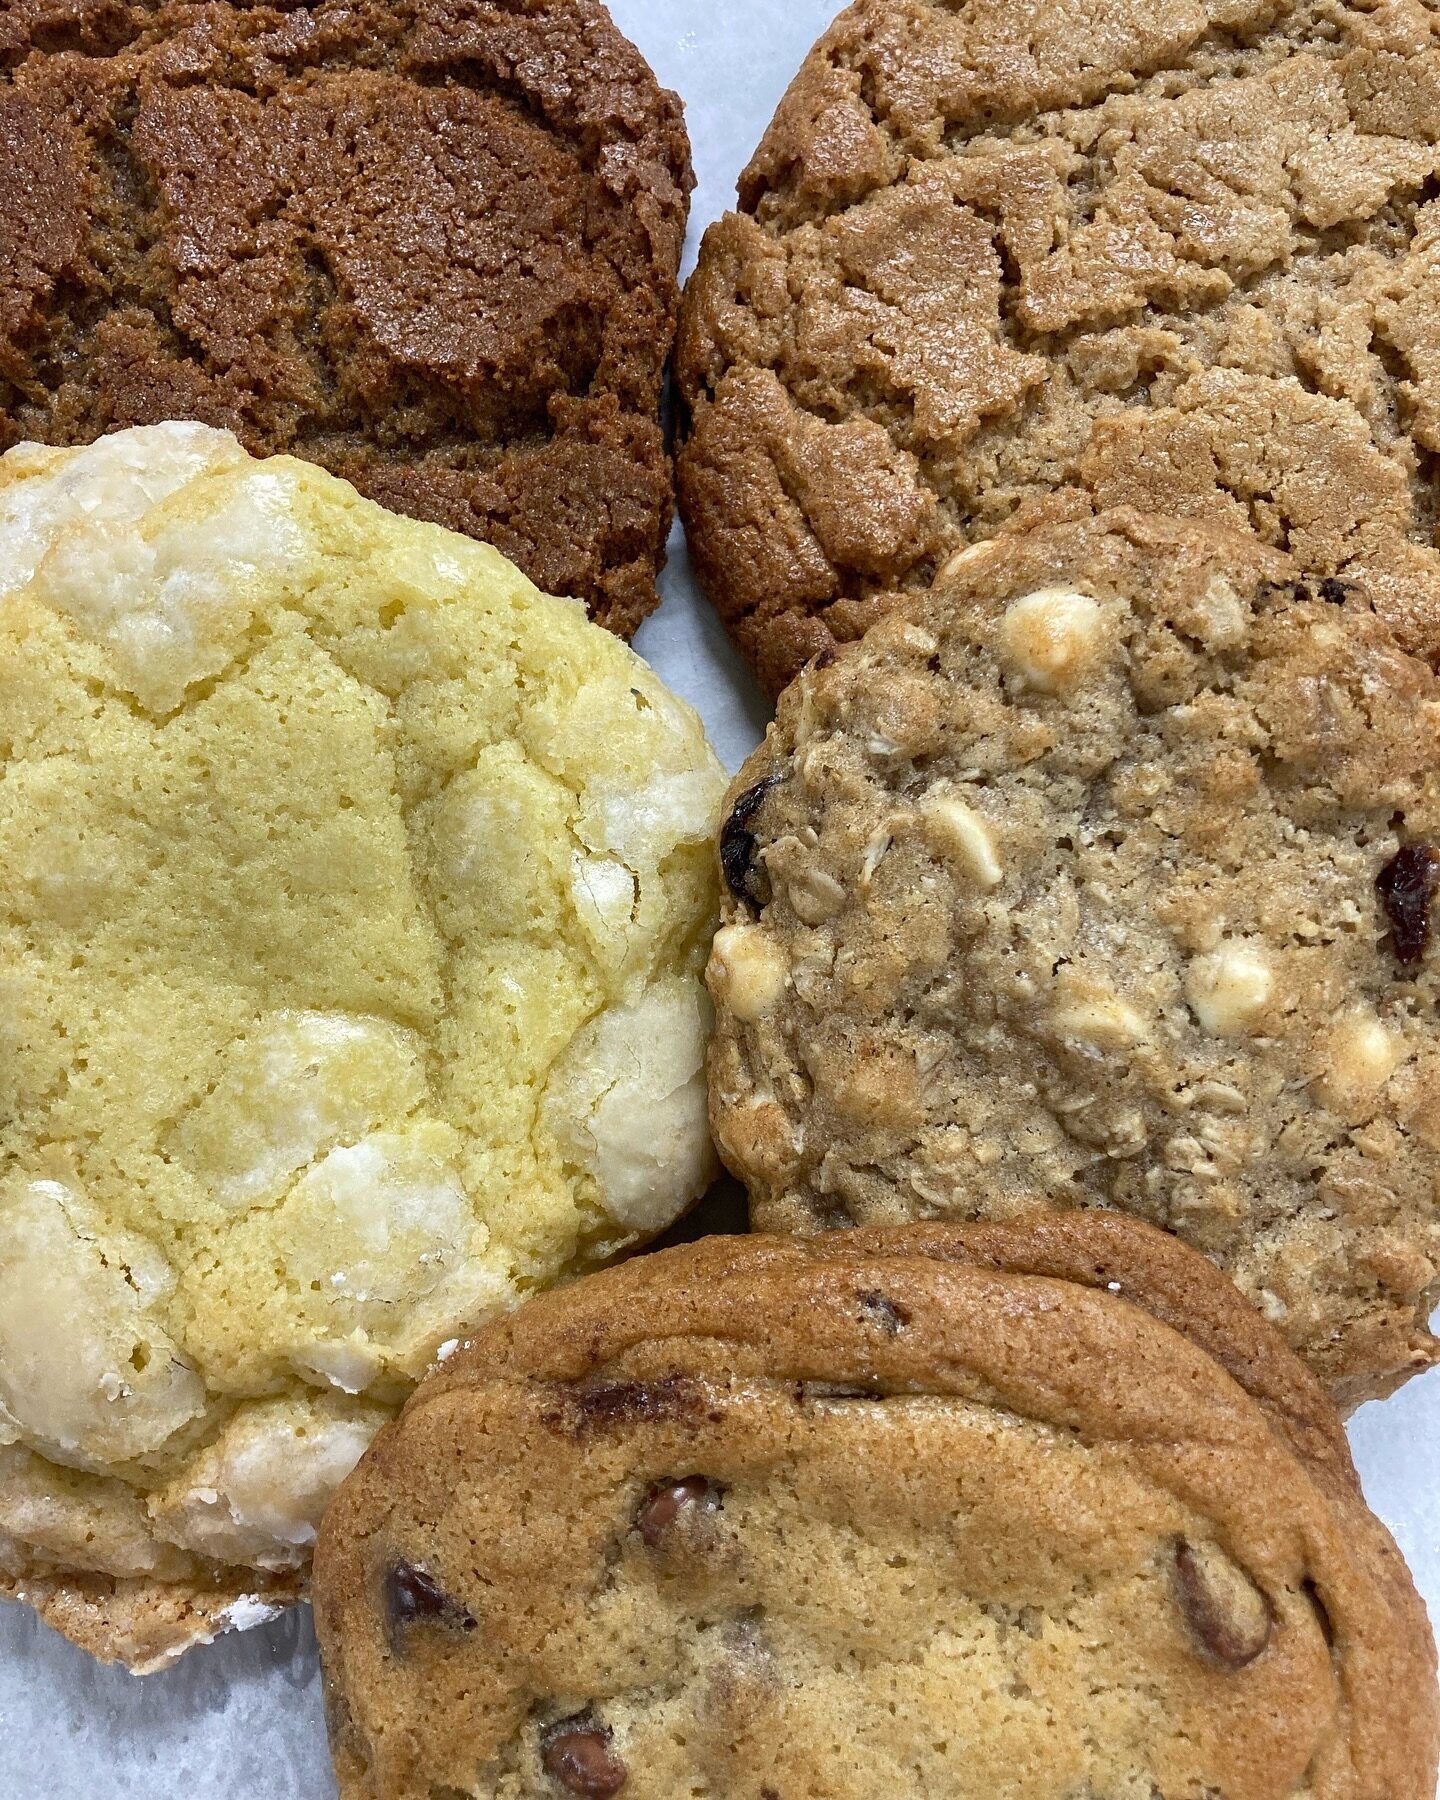 Which of our five signature cookies is your favorite? Comment 🍫 for Chocolate Chip! (Instagram only allows 4 poll options!) 

#cookies #cookie #bakery #patisserie #signaturecookies #orchardpark #orchardparkny #buffalo #buffalony